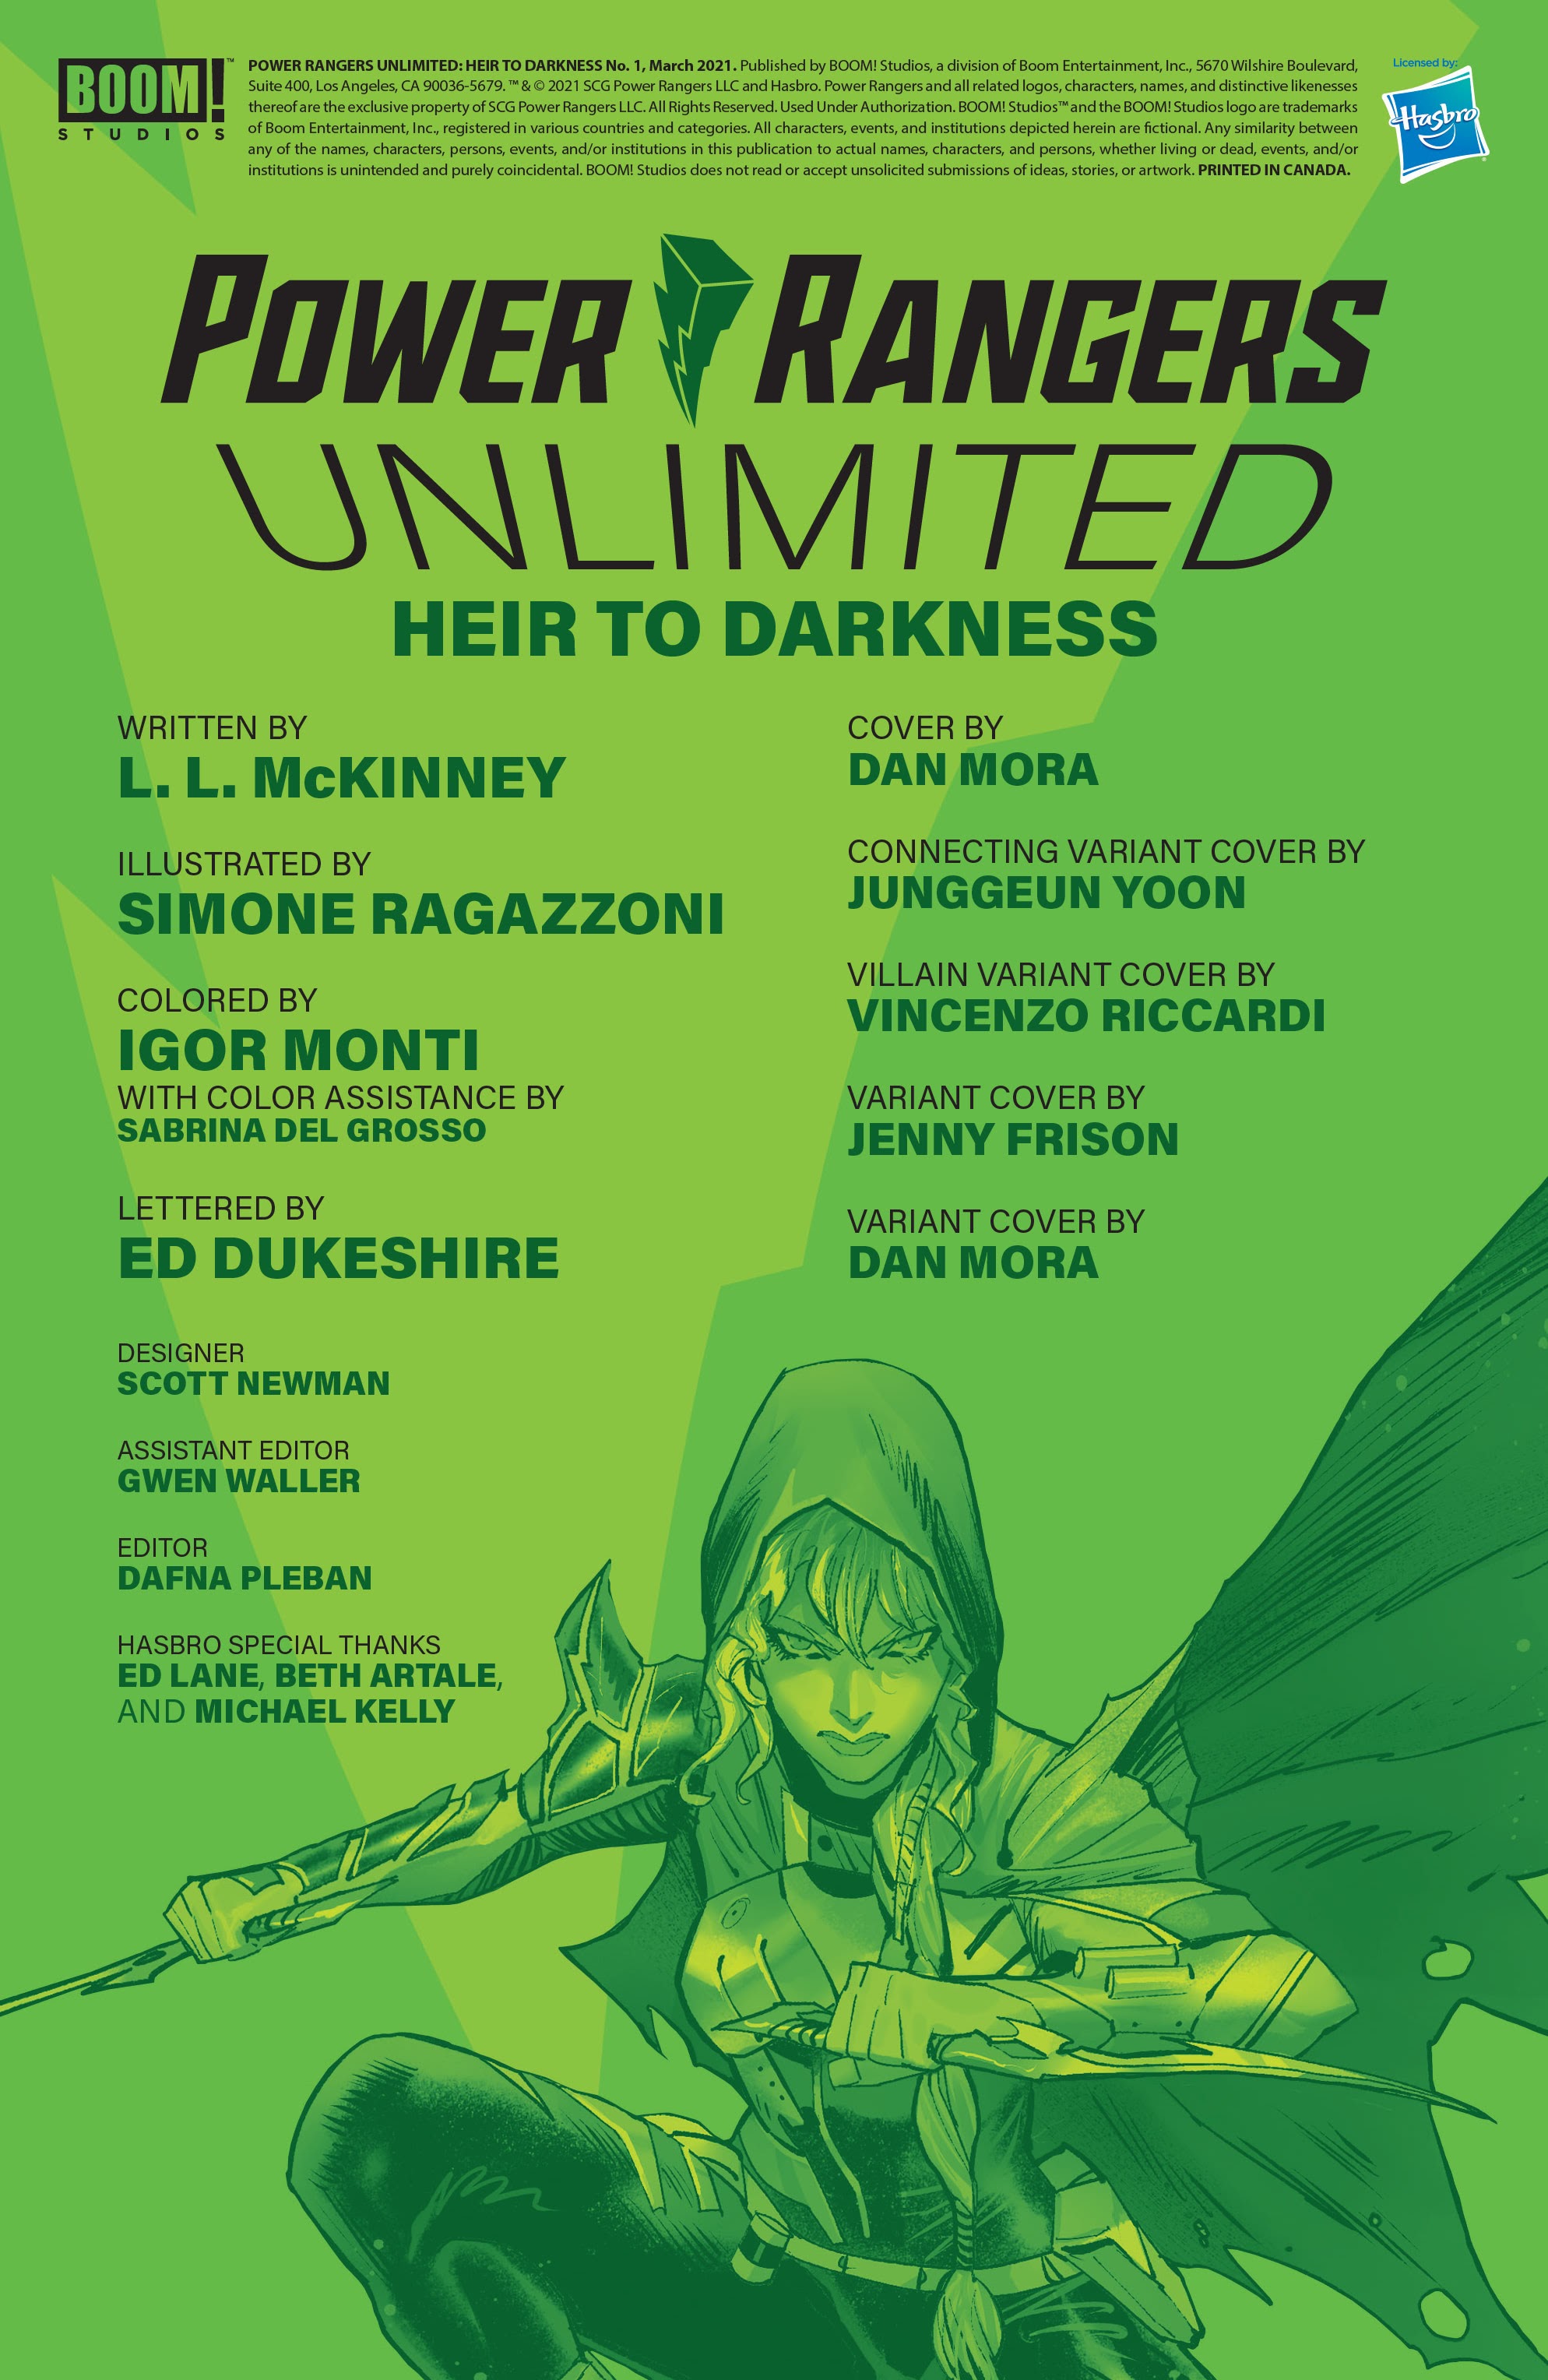 Read online Power Rangers Unlimited comic -  Issue # Heir to Darkness - 2